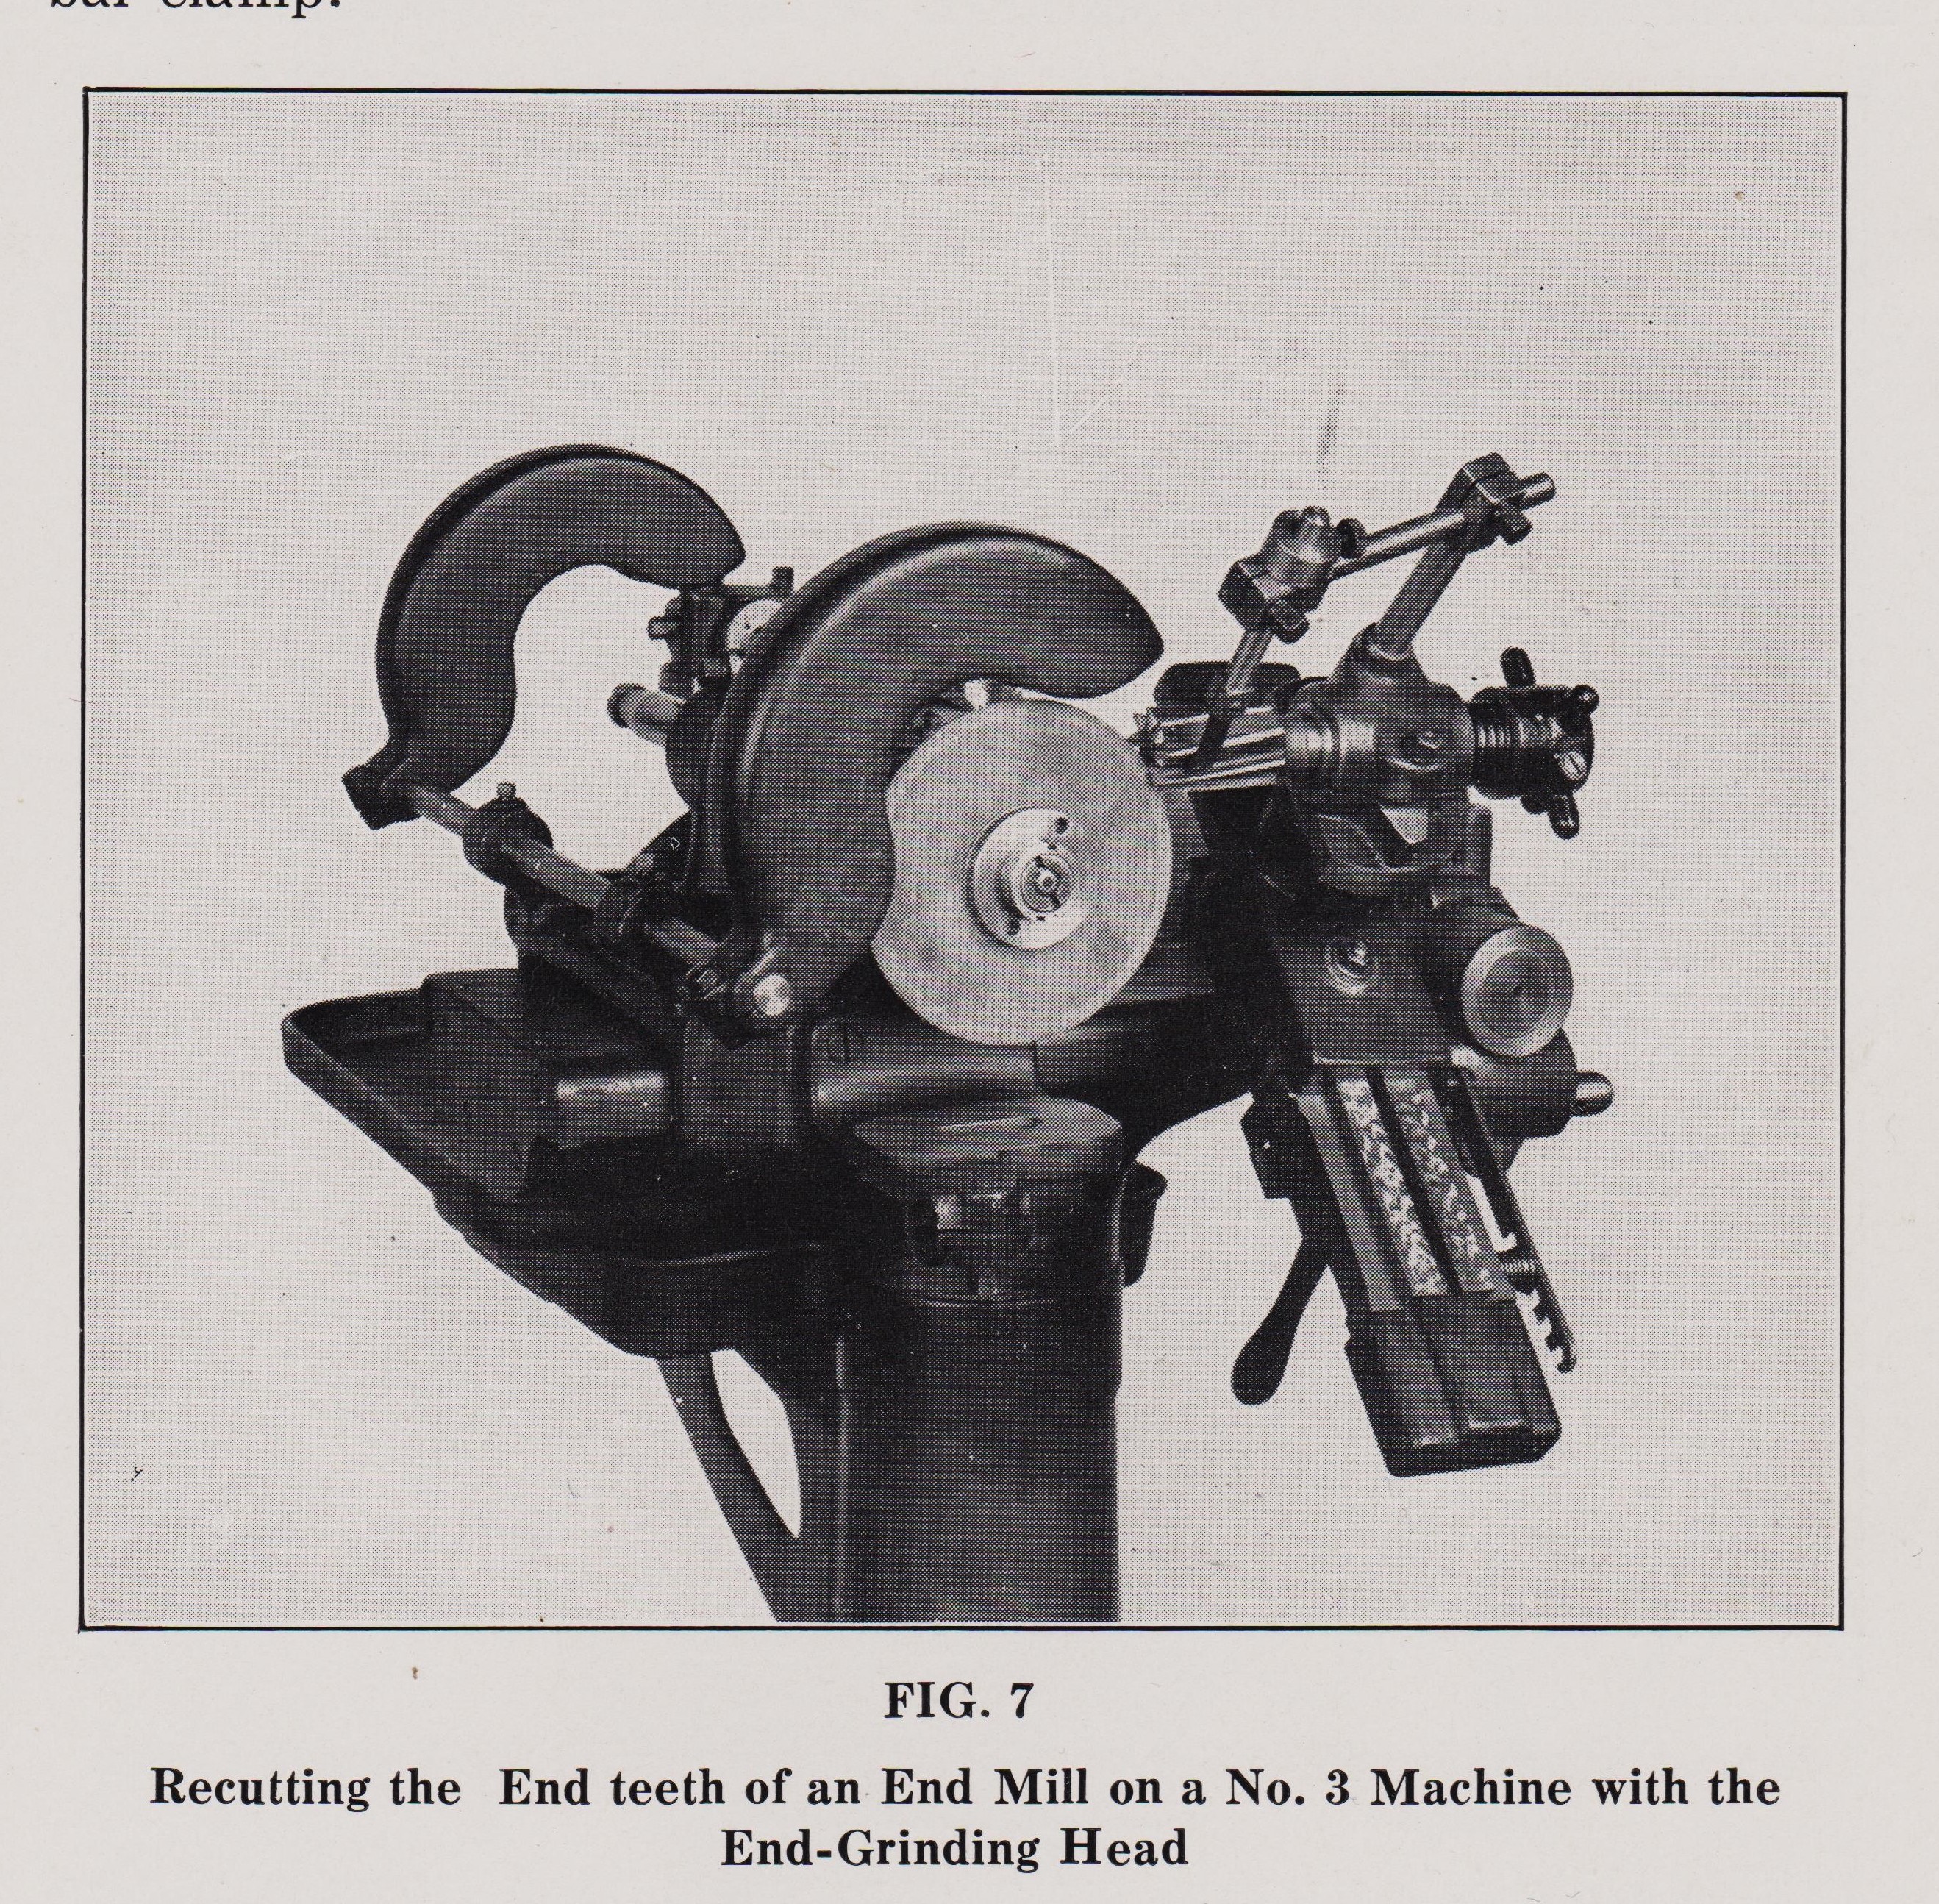 https://antiquemachinery.com/images-2020/Cutter-and-Reamer-Grinder-Machine-pg-29-Brown-and-Sharpe-Mfg-Co-1929-No2-29.jpeg"